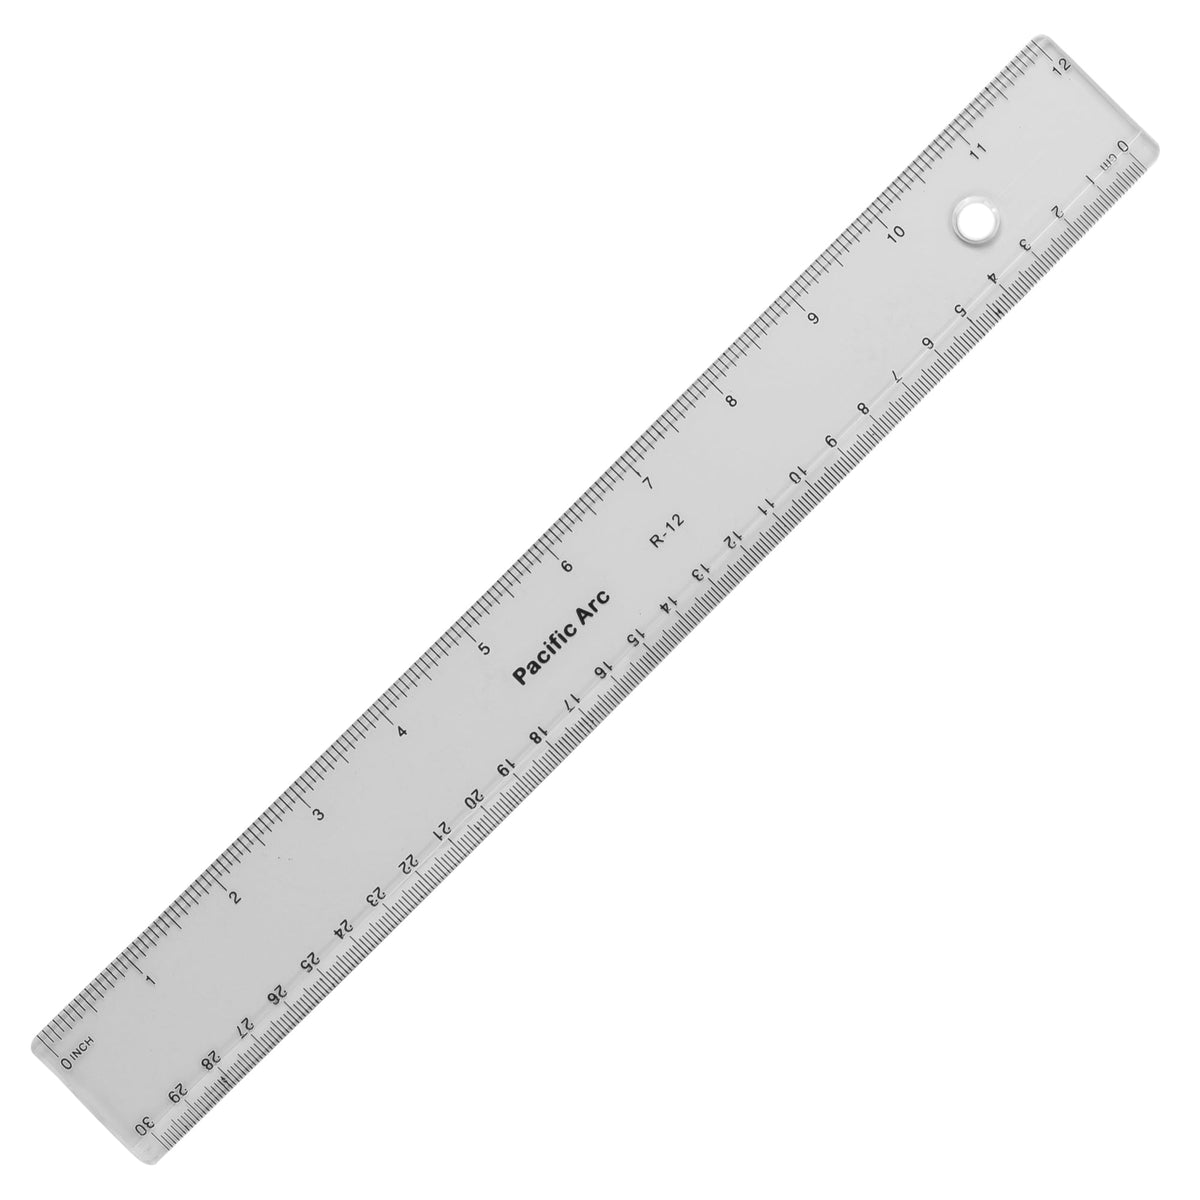 Pacific Arc, Pica Pole Metal Ruler, with Pica, Points, Inches, and Agate  Measurements, Stainless Steel Ruler for Drafting